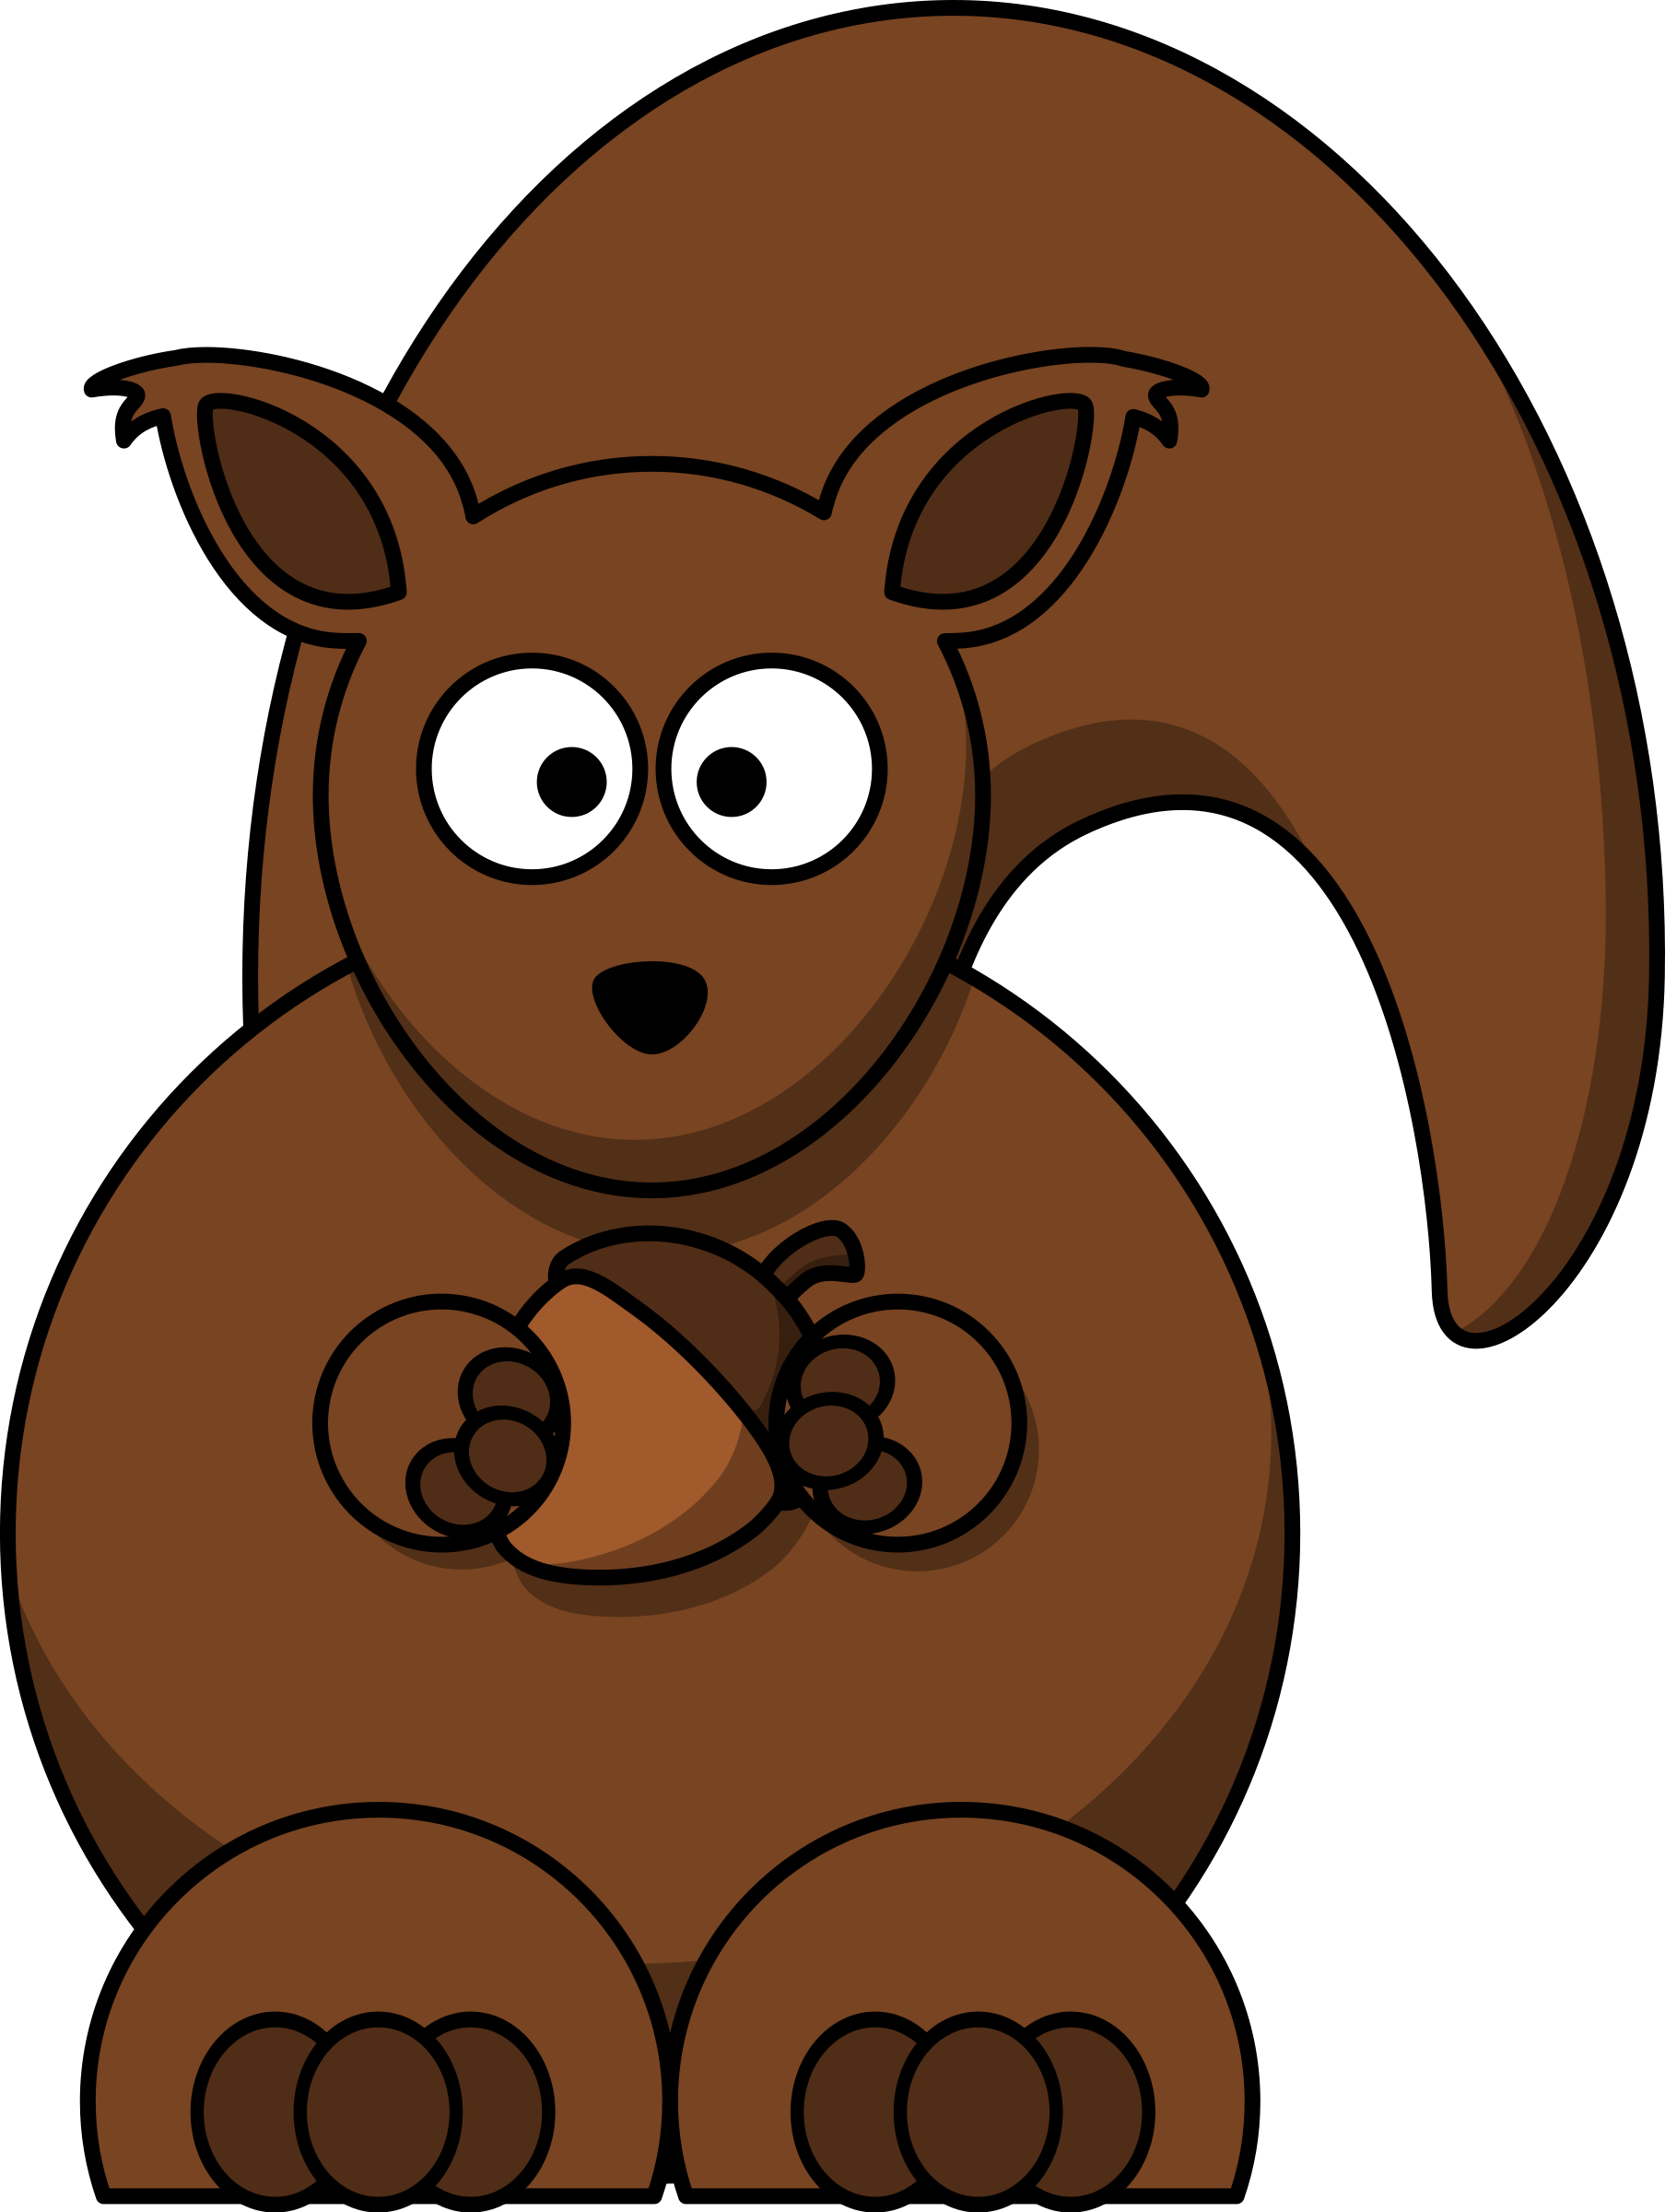 Cartoon squirrel Icons PNG - Free PNG and Icons Downloads